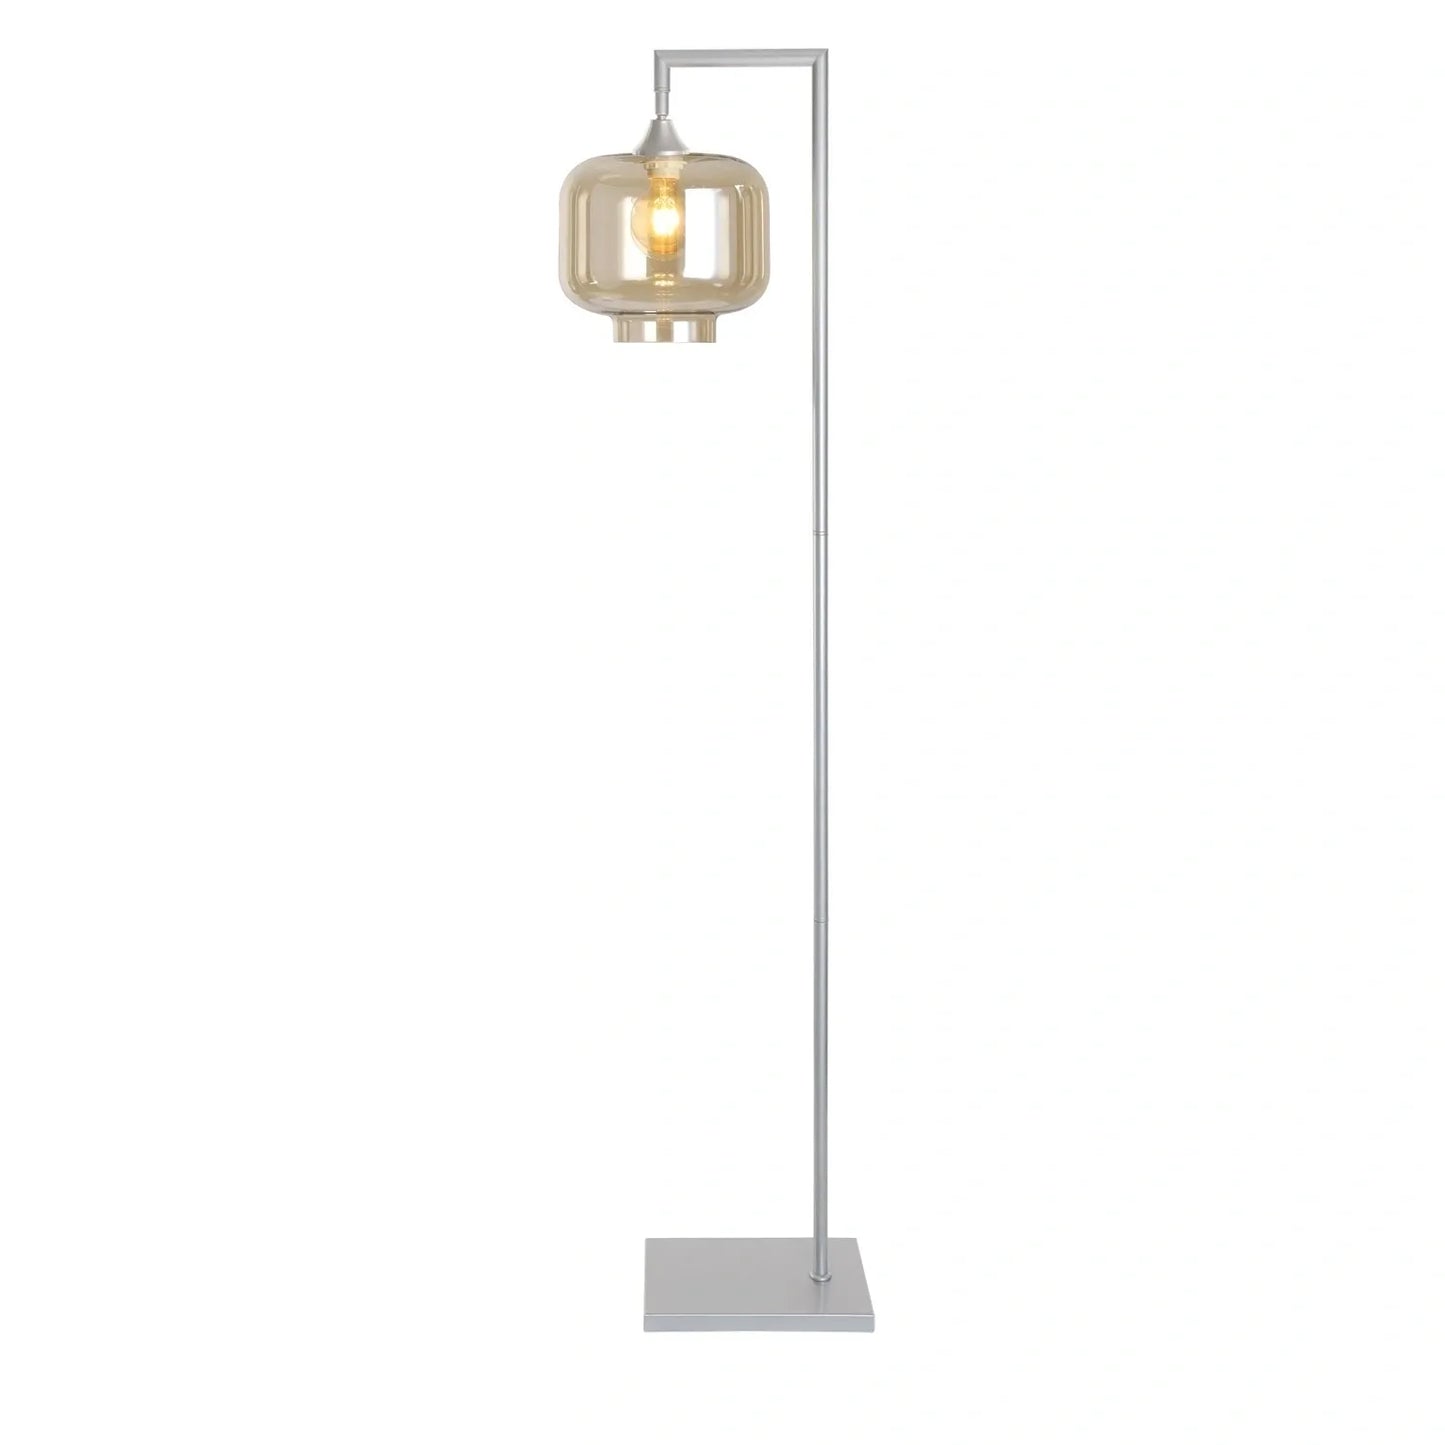 Murano Silver Floor Lamp with Large Round Glass Shade